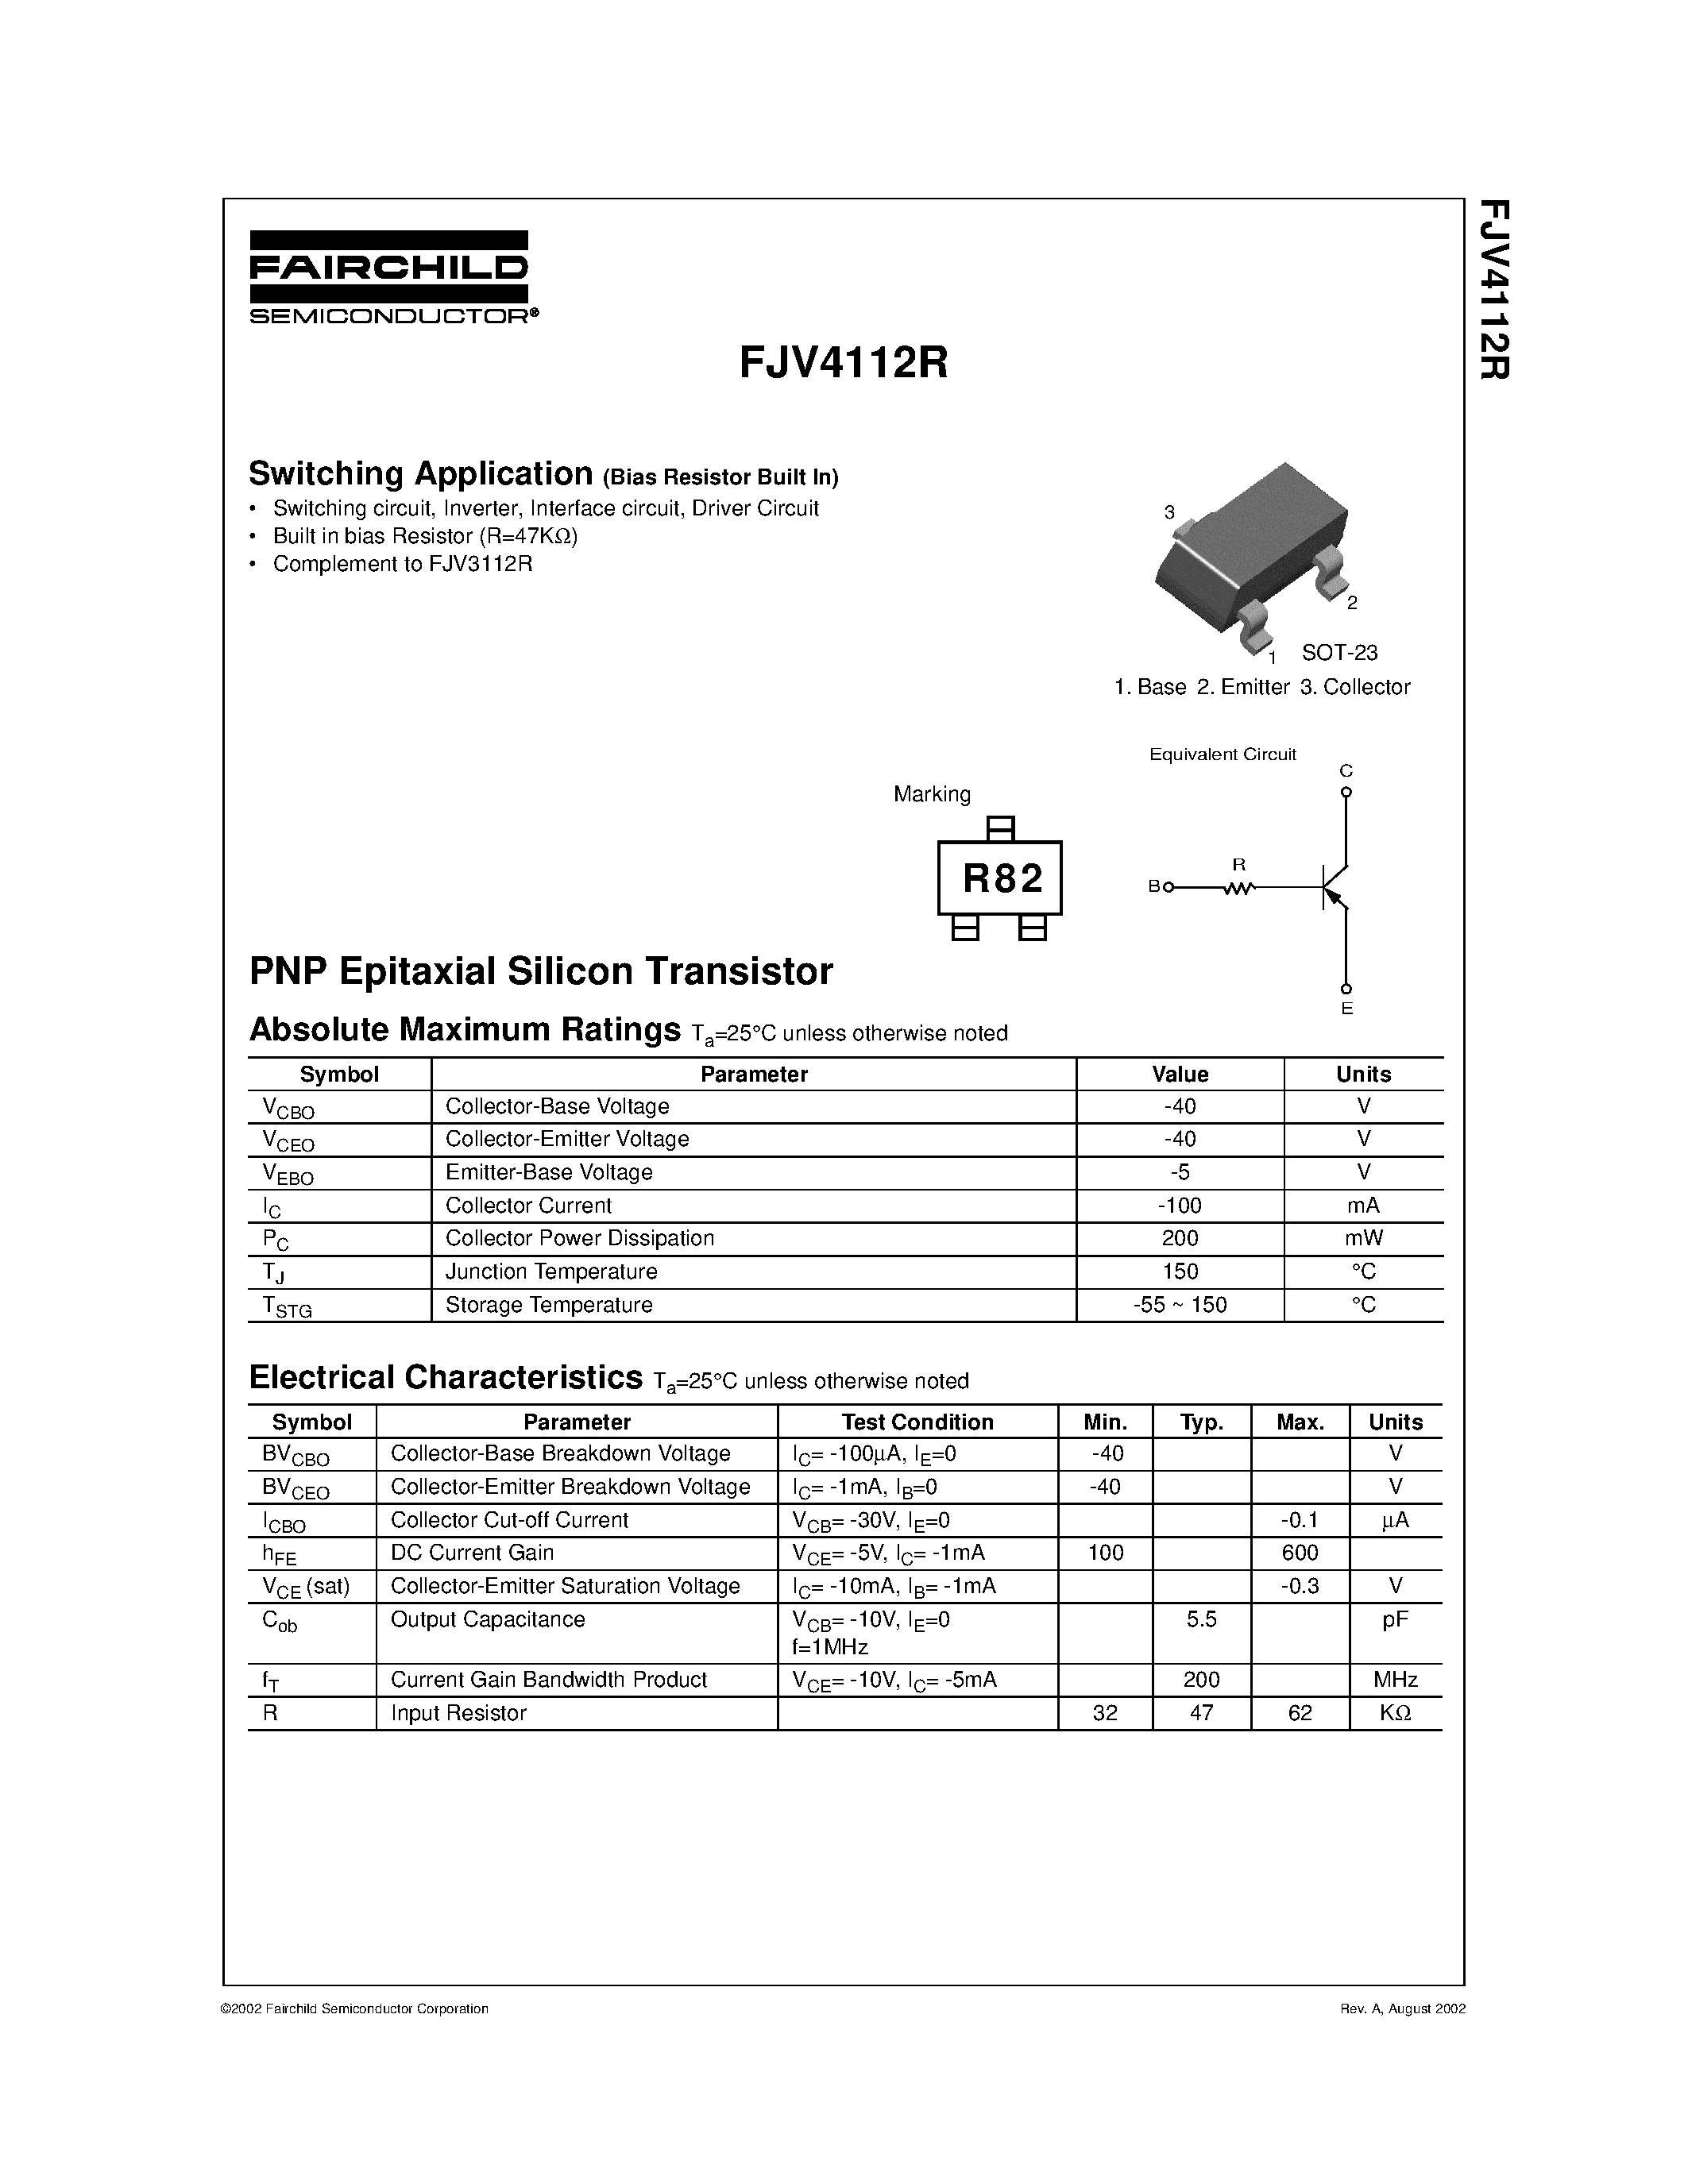 Datasheet FJV4112R - PNP Epitaxial Silicon Transistor page 1